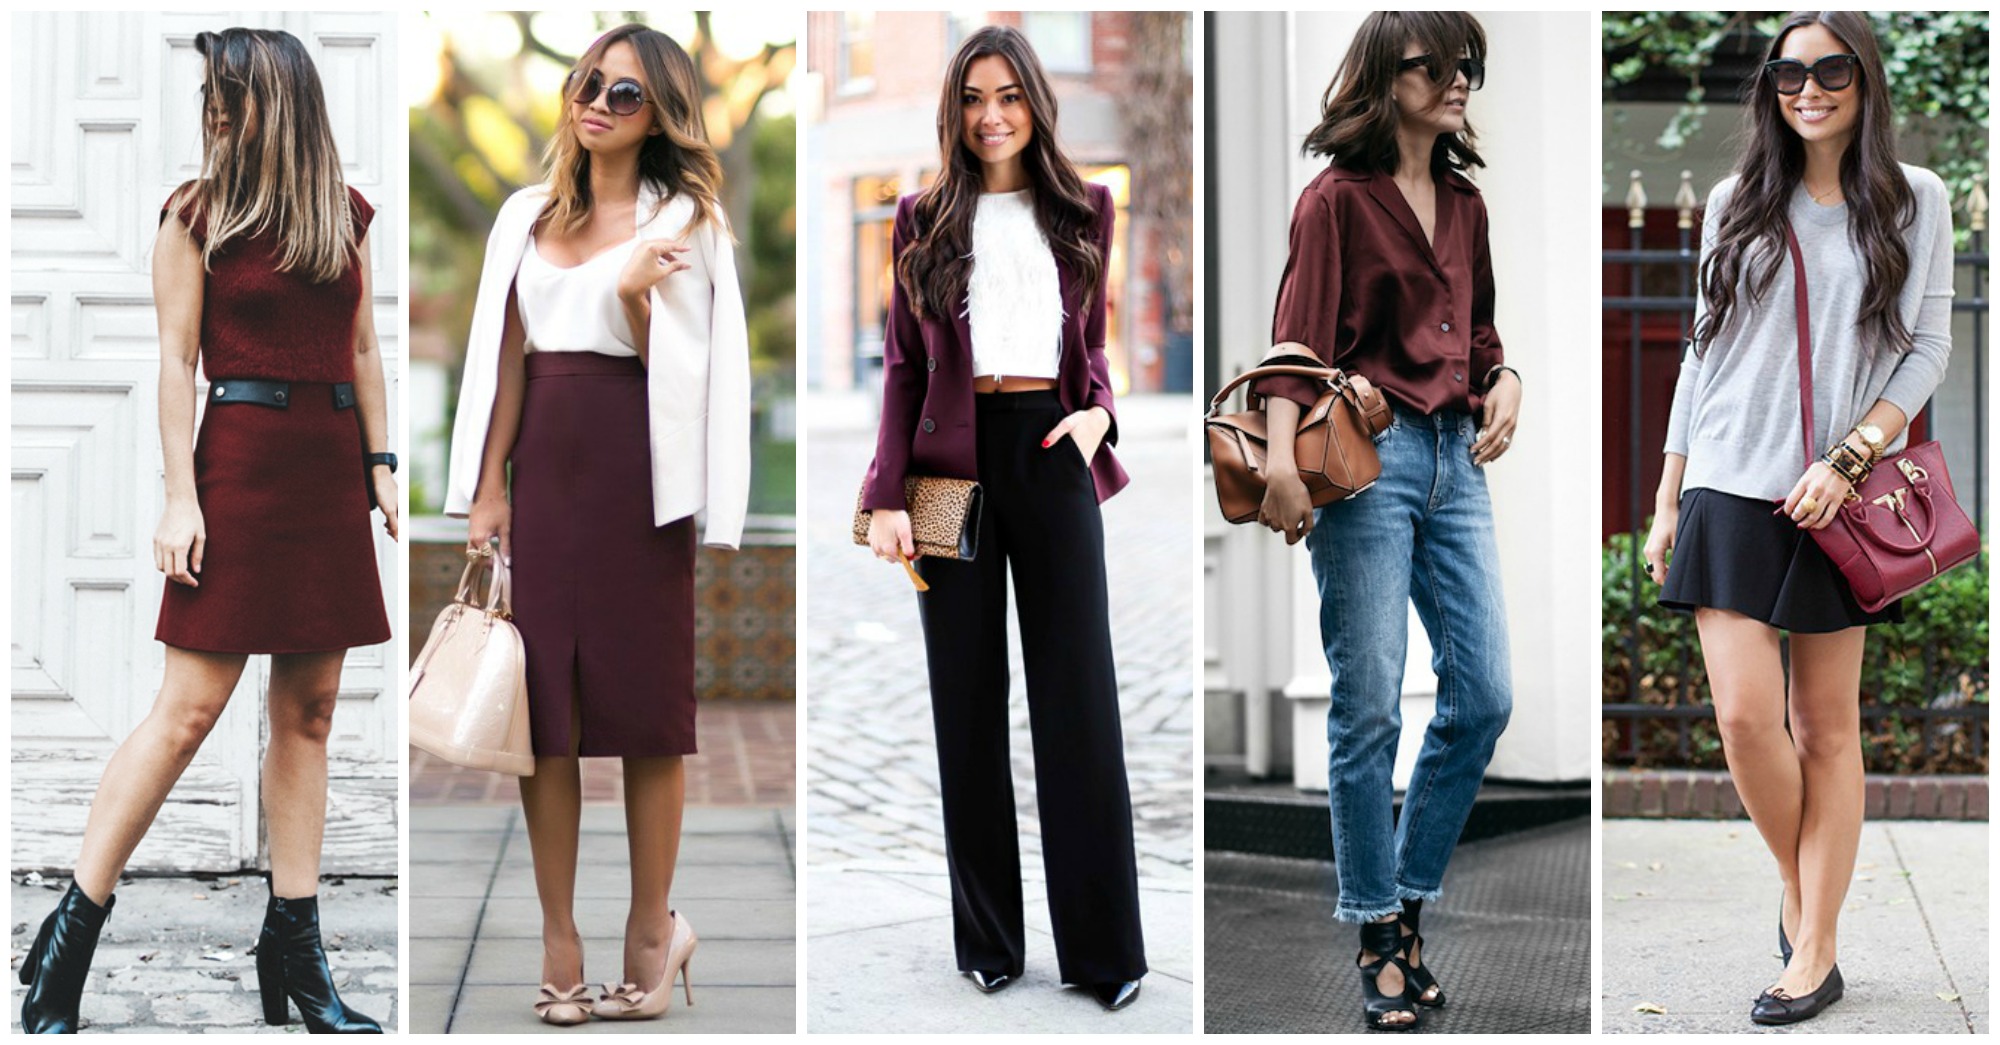 16 Mesmerizing Burgundy Outfits Will Take Your Look To The Next Level